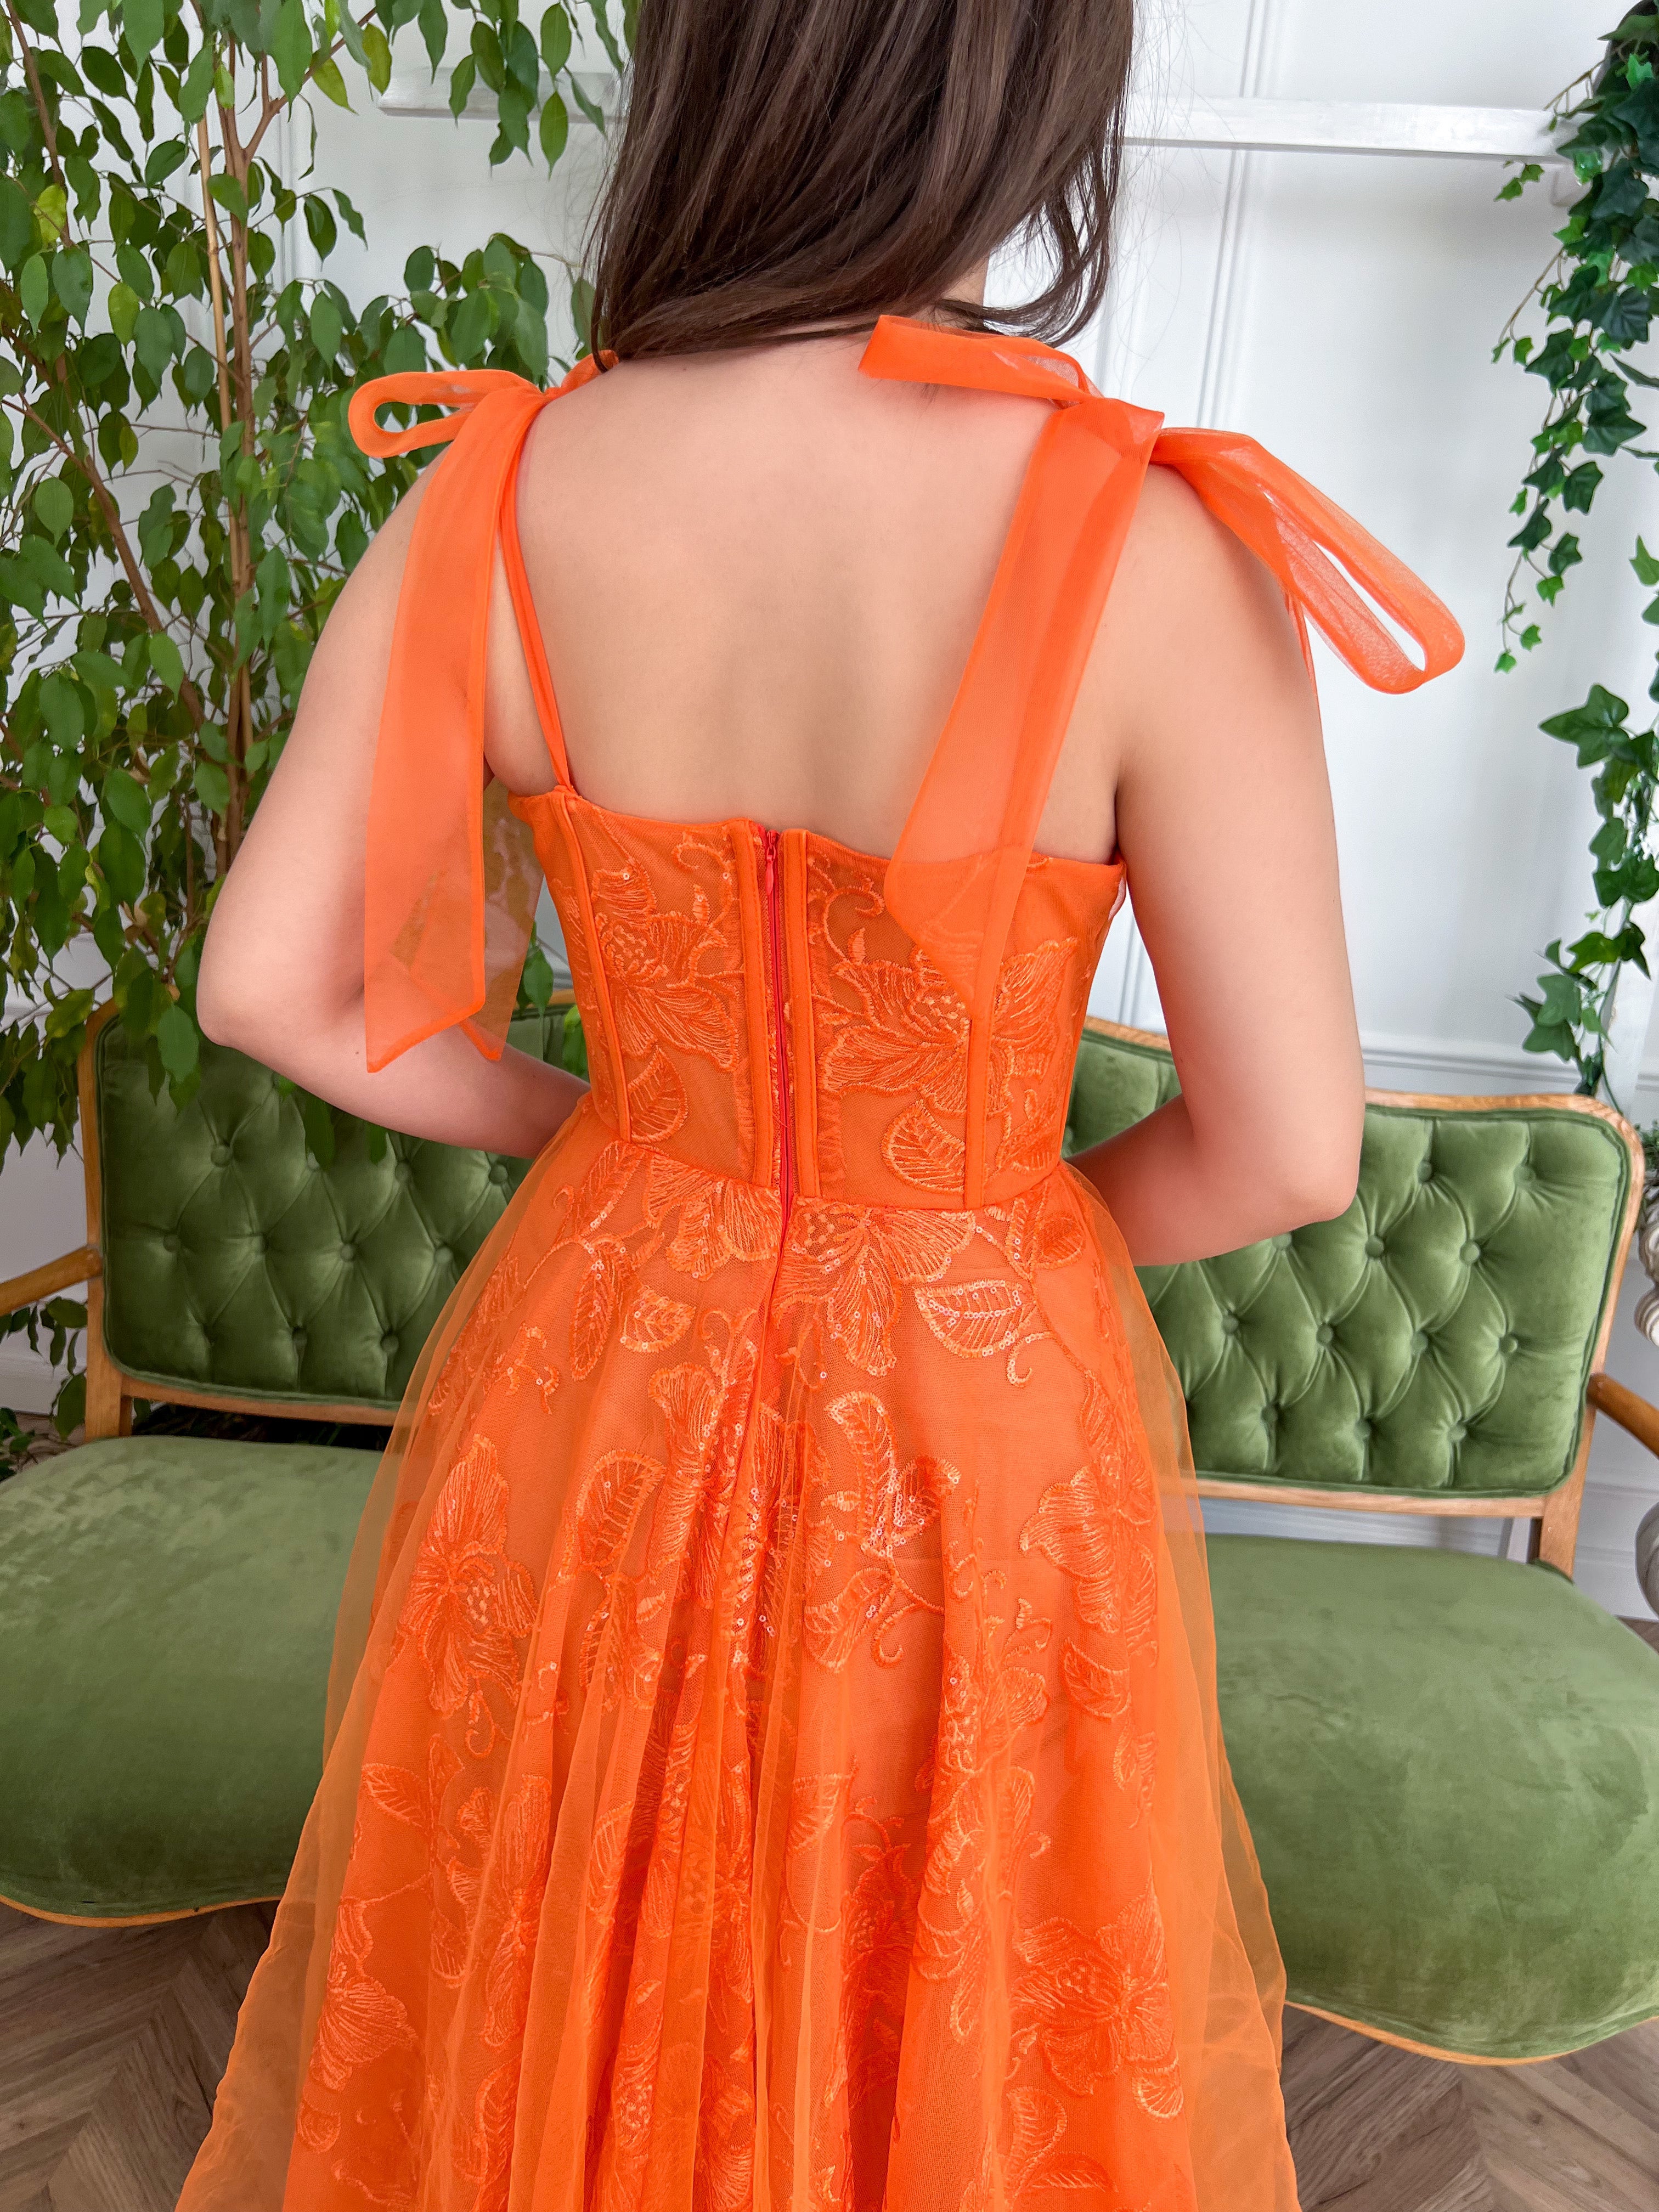 Orange A-Line dress with spaghetti straps, and embroidery